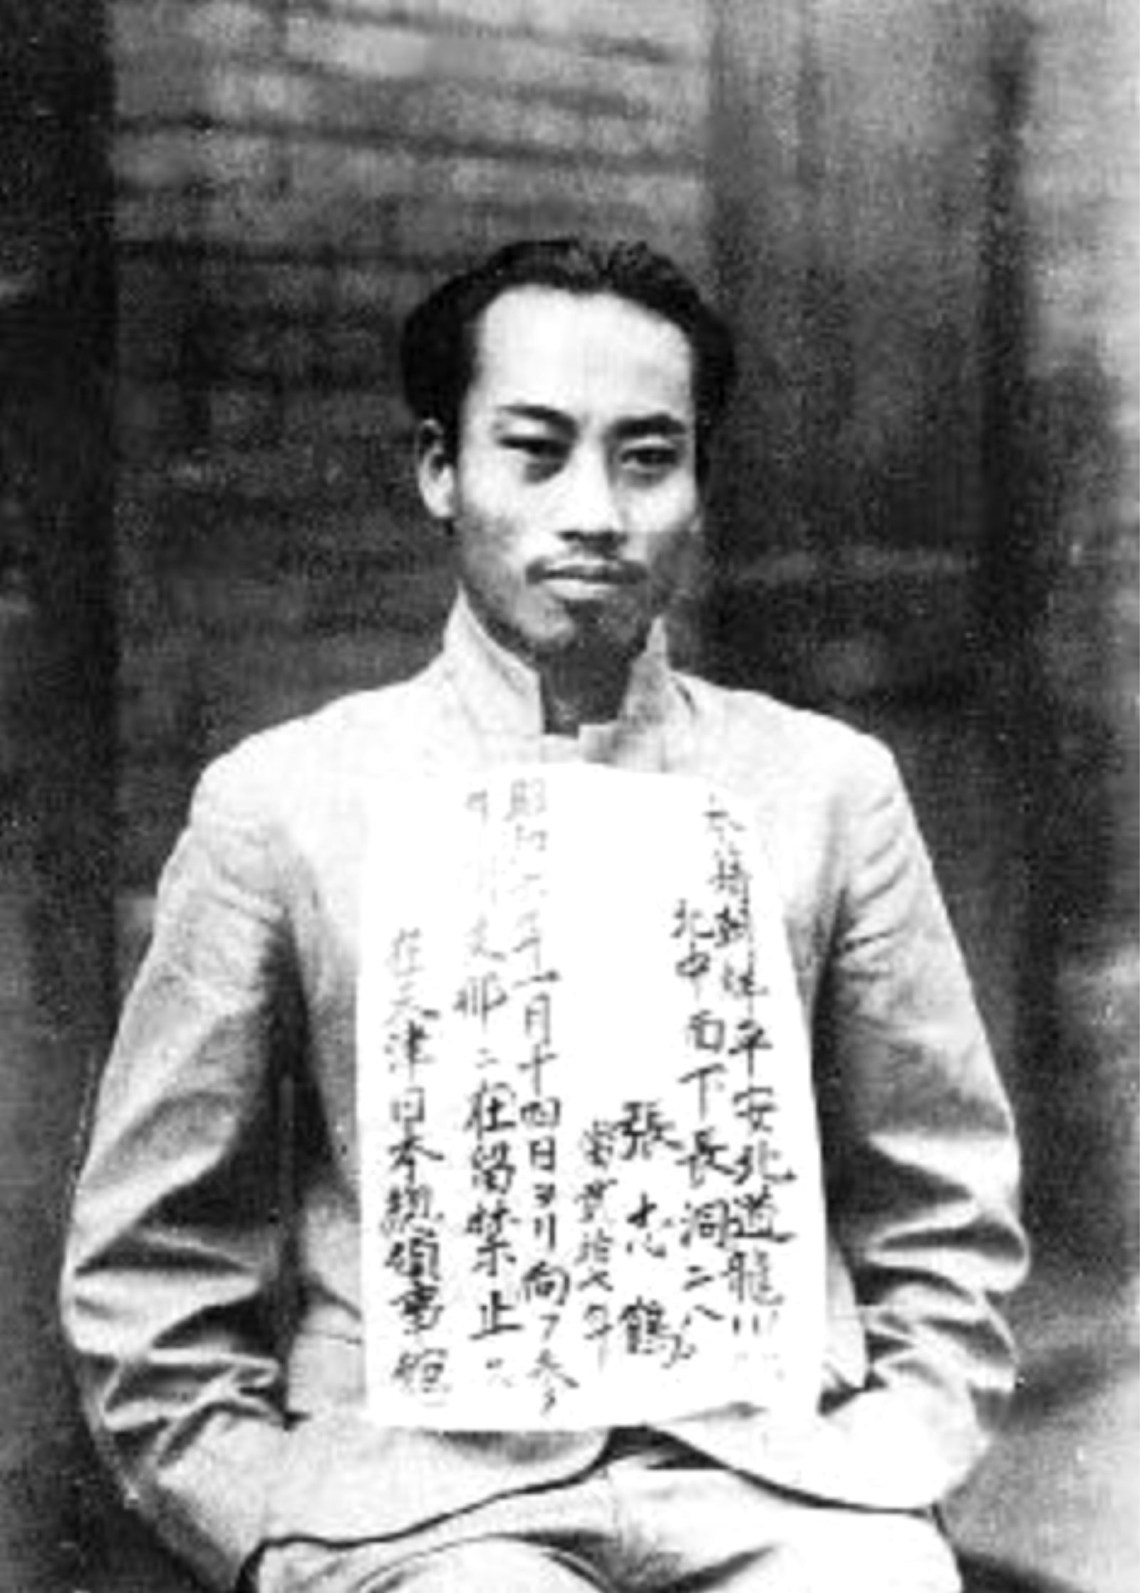 Kim San under arrest, possibly at the Japanese consulate in Tianjin, 1931. The notice on his chest states that he would be banned from China for three years